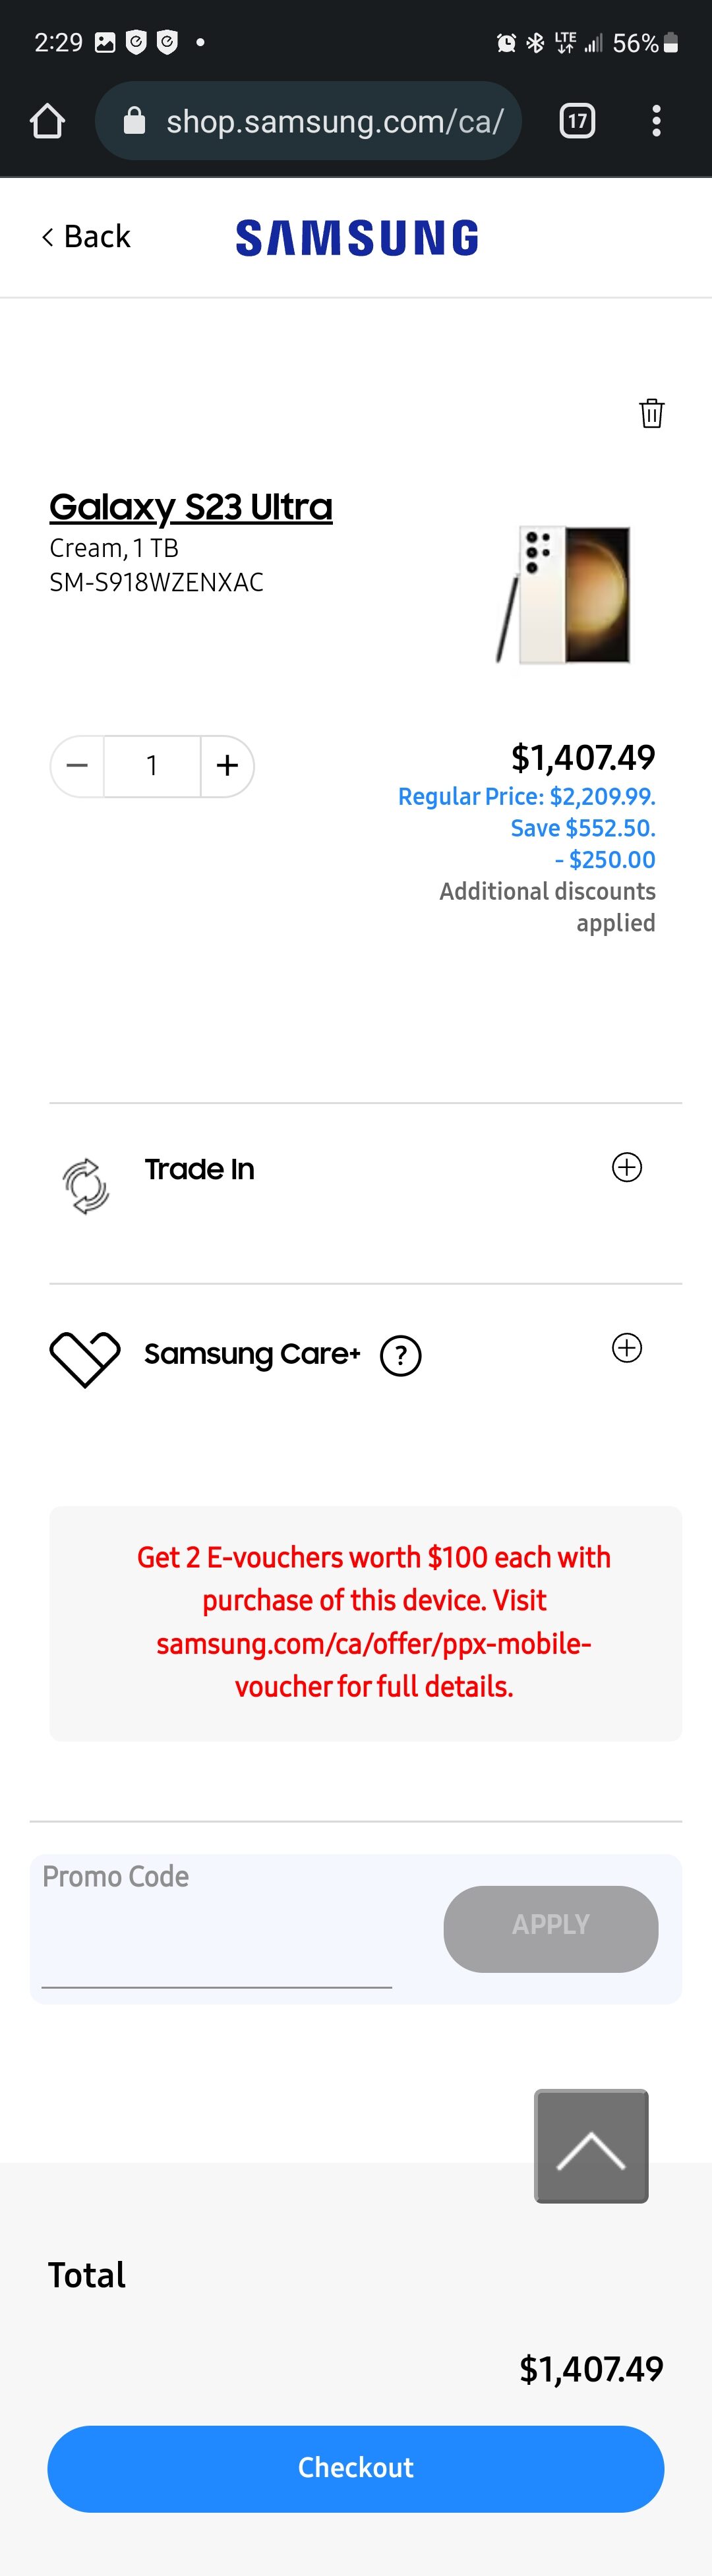 Samsung] S23 Ultra 1TB - Cream Color Only $1407 ($800 off) through Student  Bean - No Trade In Required - RedFlagDeals.com Forums